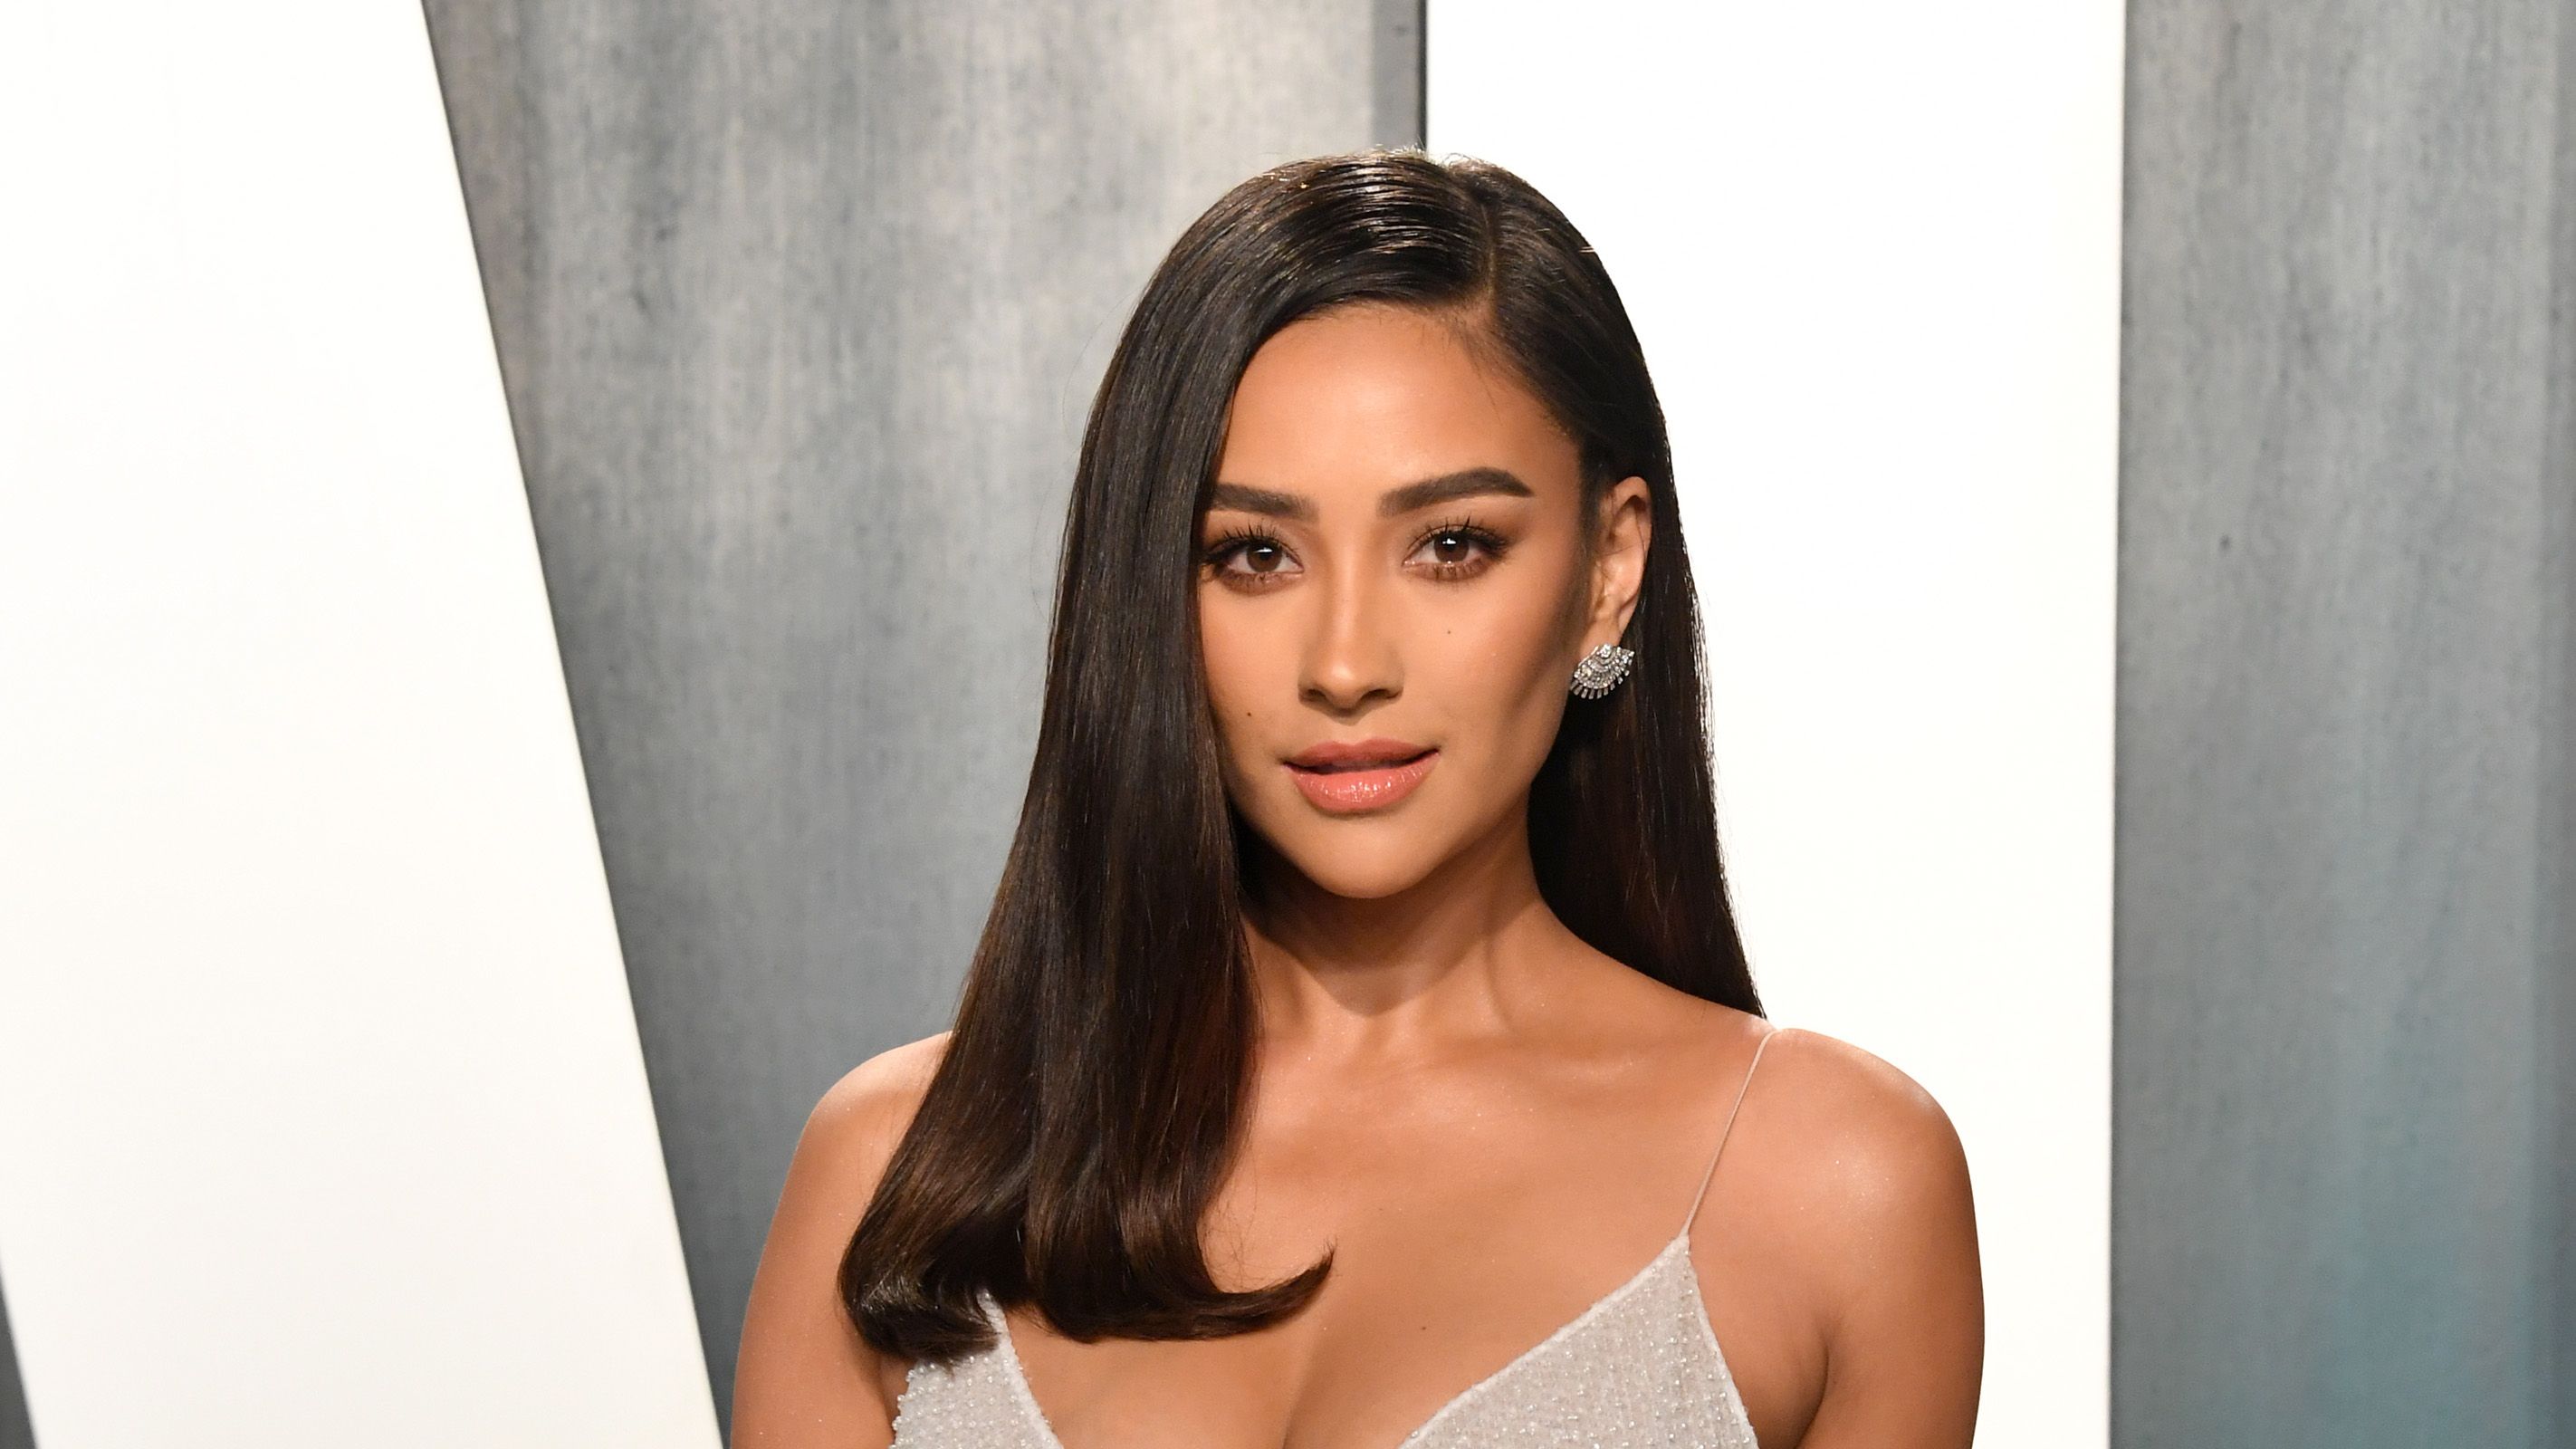 Jacqueline Nude Photos - Shay Mitchell Shows A Peek Of Toned Butt, Legs In Naked IG Photo